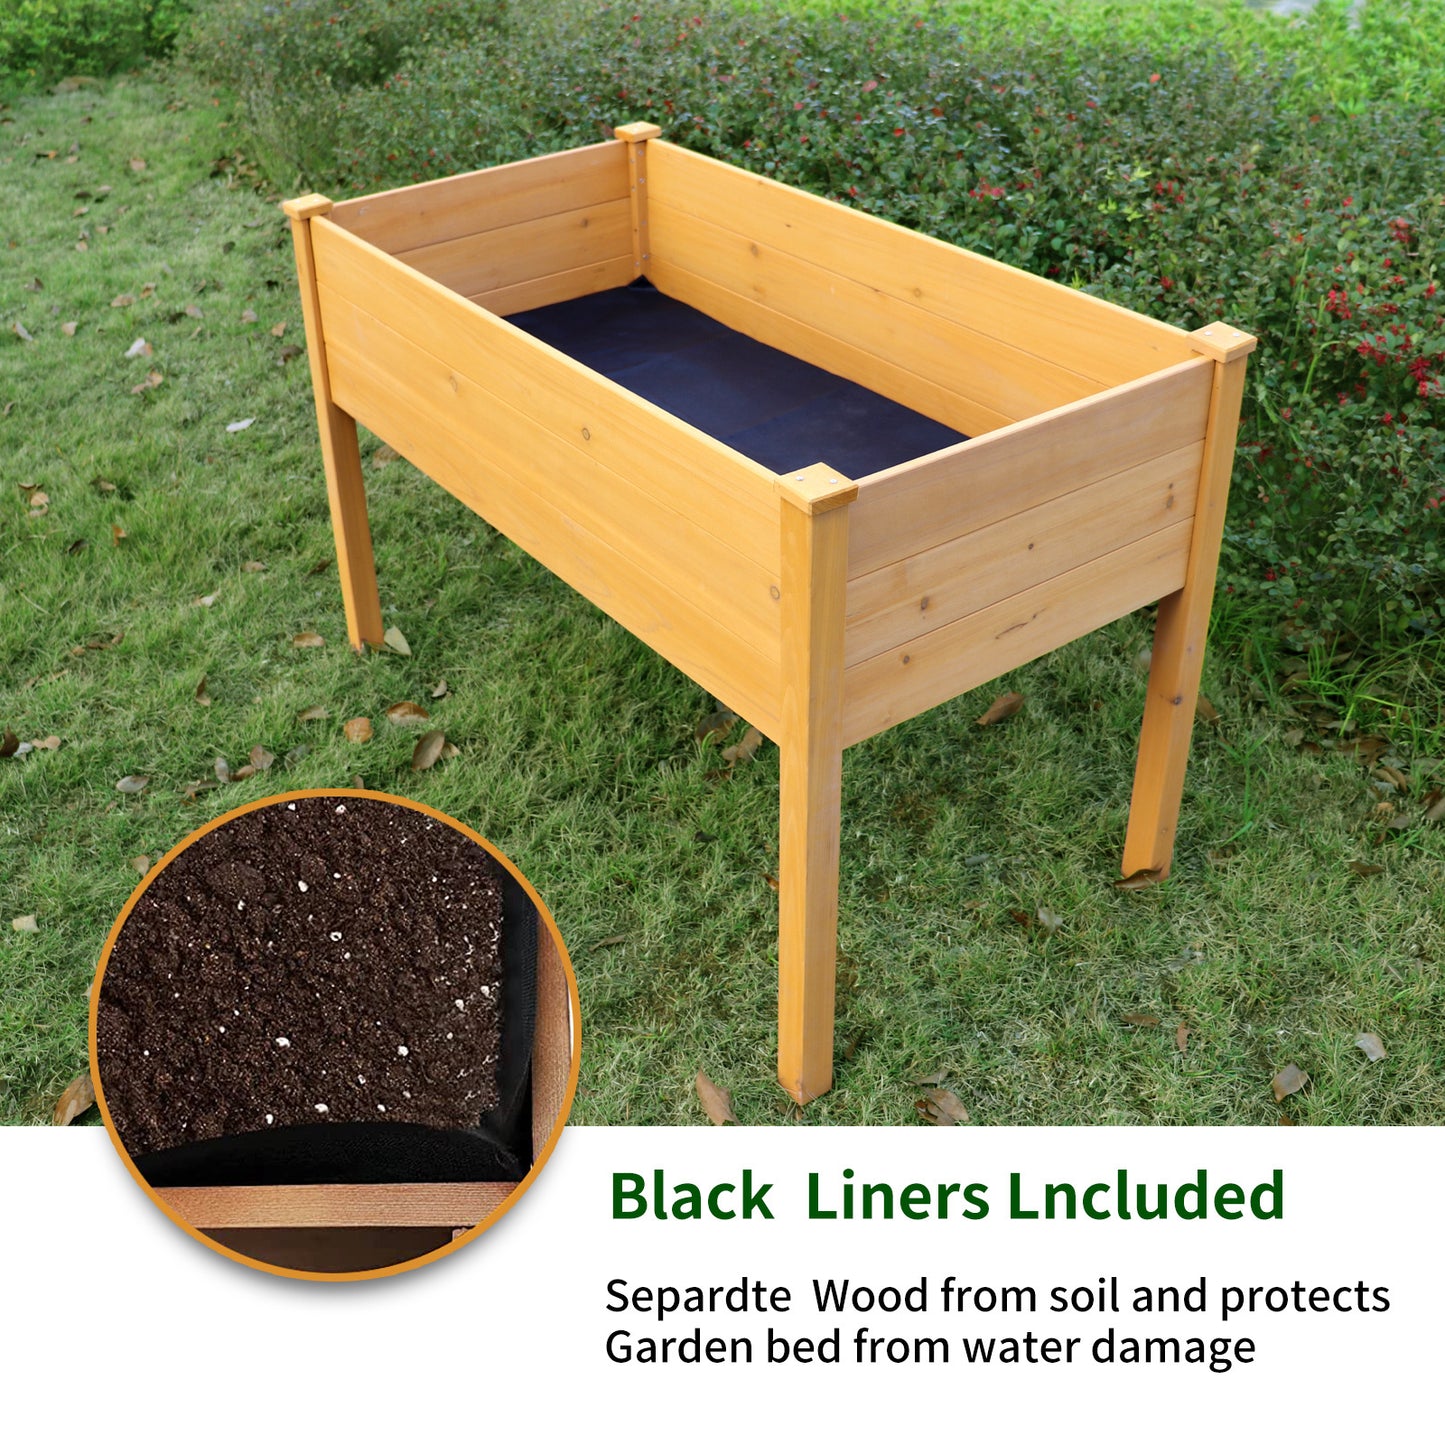 Outdoor Raised Garden Bed, Wood Planter Box for Vegetable Flower, Elevated Reinforced Large Garden Planters Boxes for Backyard Patio Gardening Balcony (48.5”L, Natural Wood)